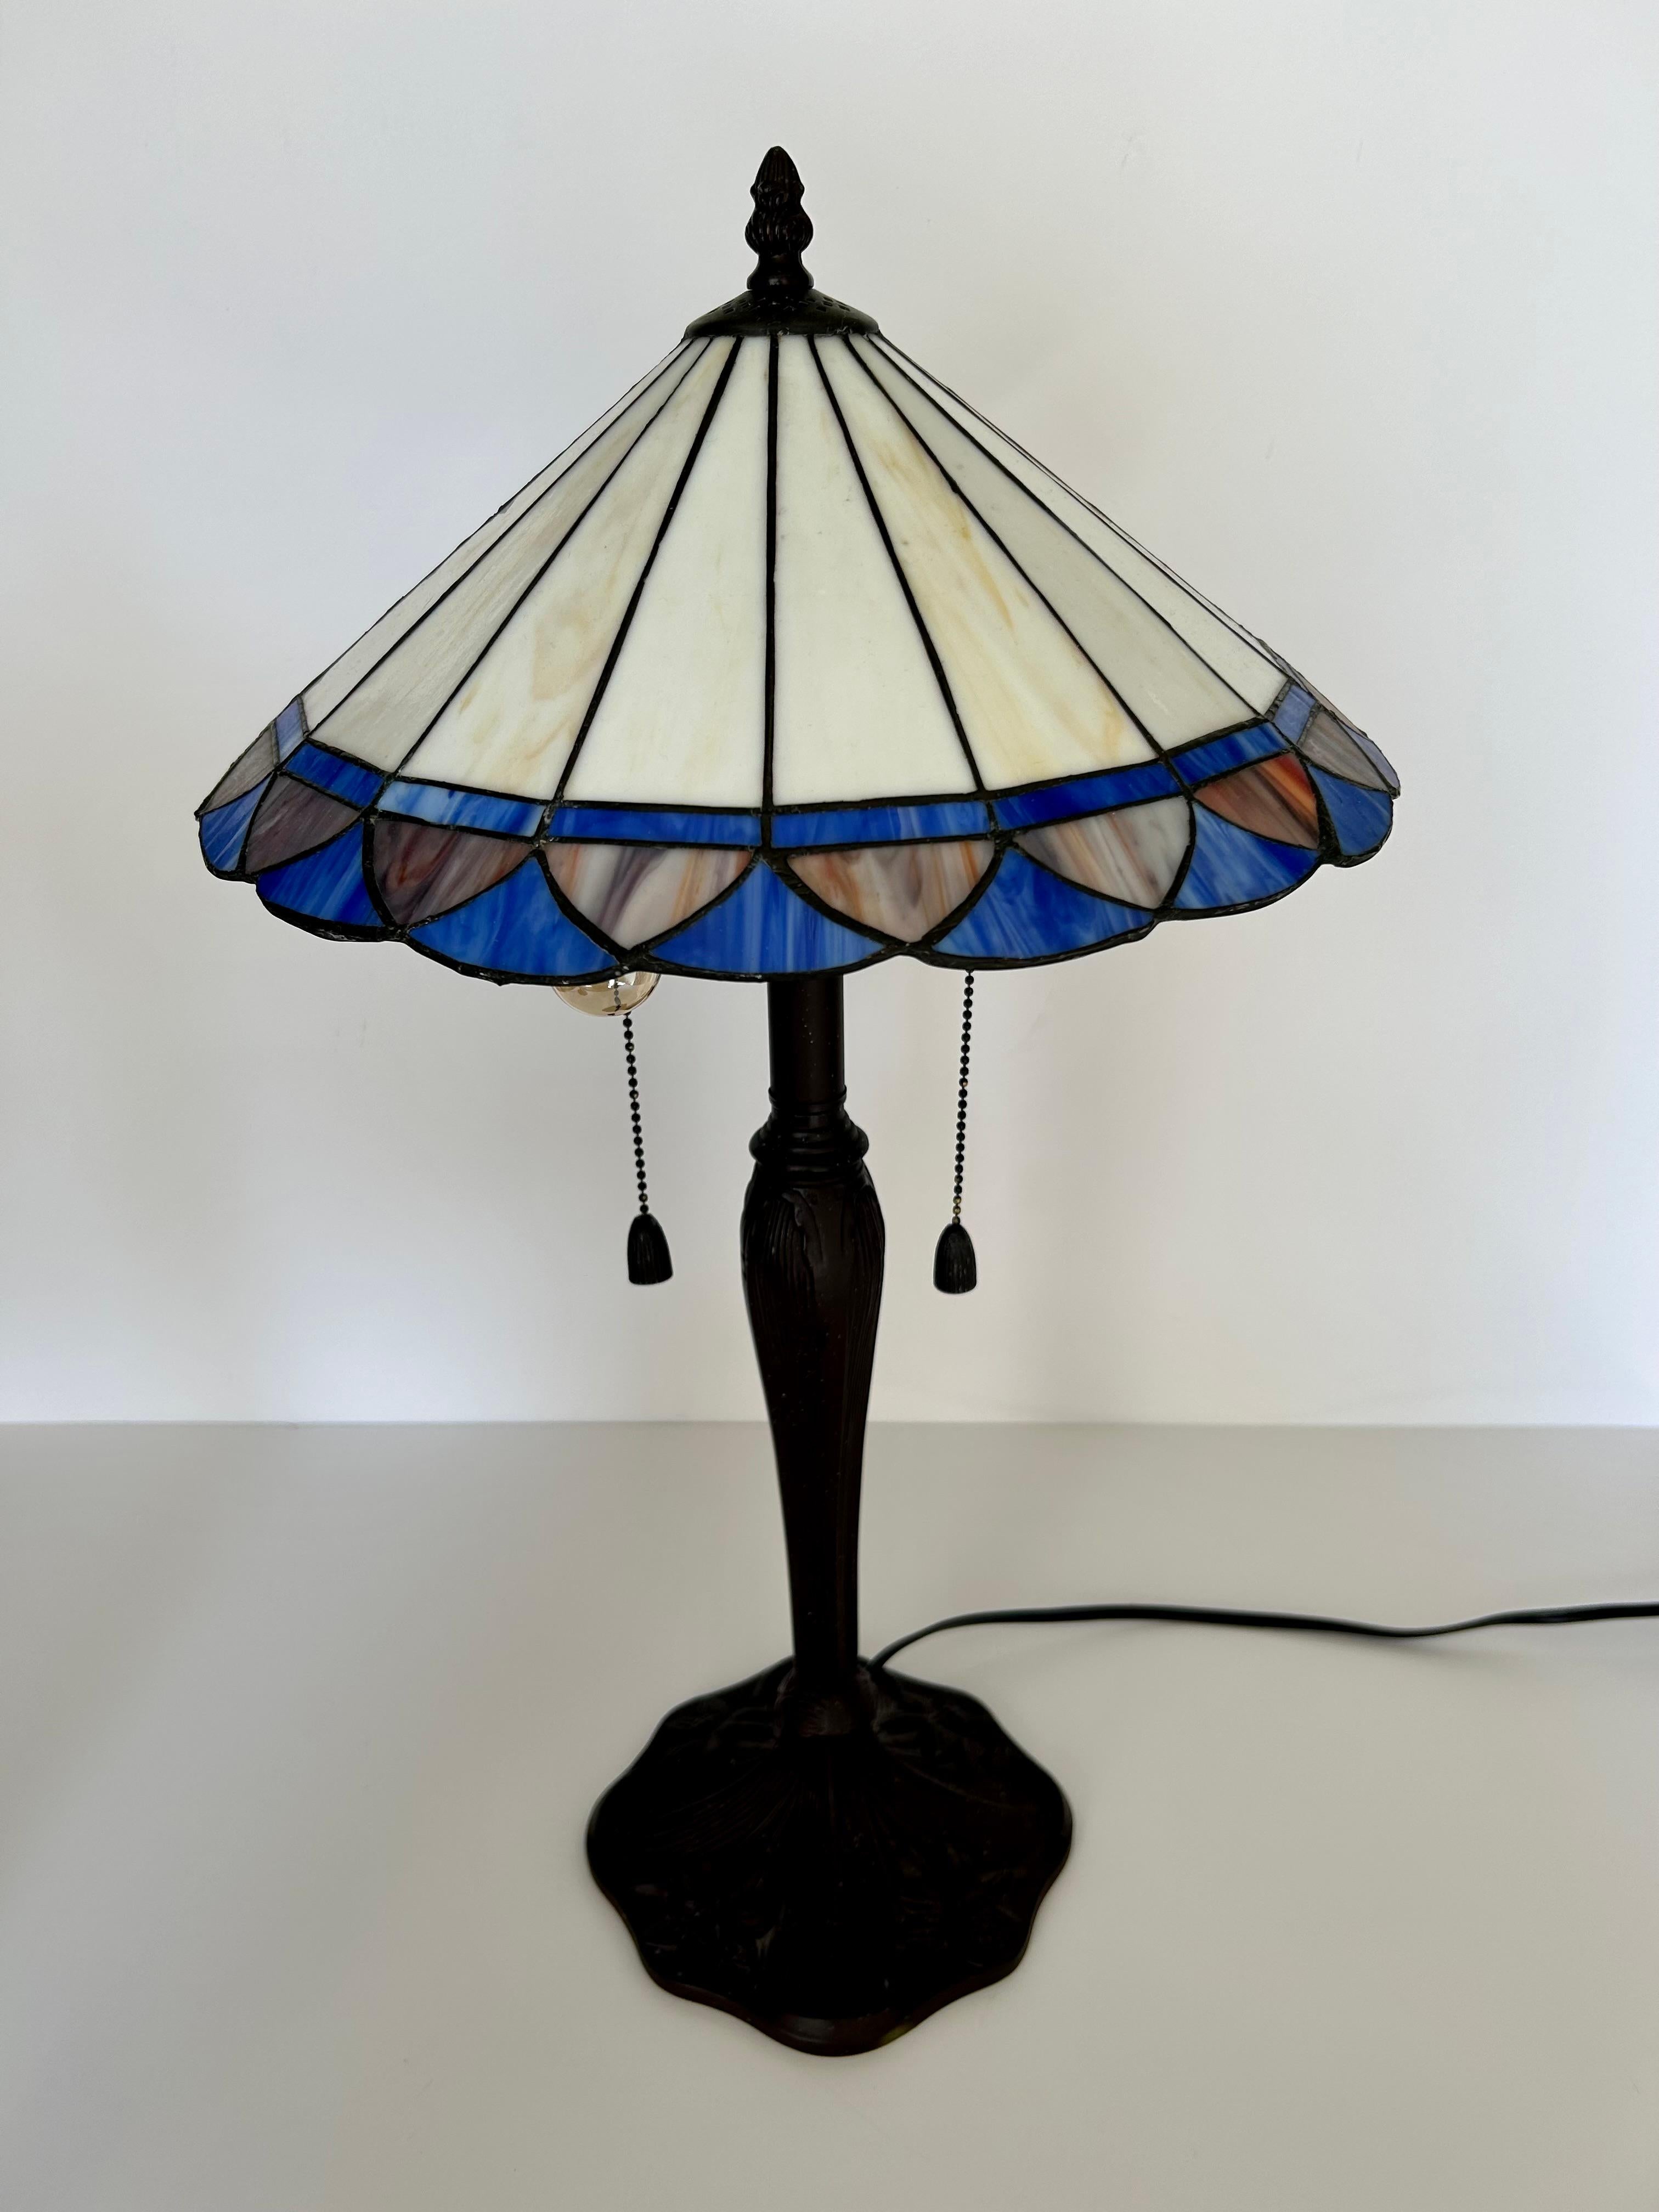 This is a wonderful pair of twentieth century, American slag glass lamps. Wonderful conical shades in tones of cream with brilliant indigo glass on the scalloped border. Cast metal bases in sinuous Art Nouveau design. Original cast metal